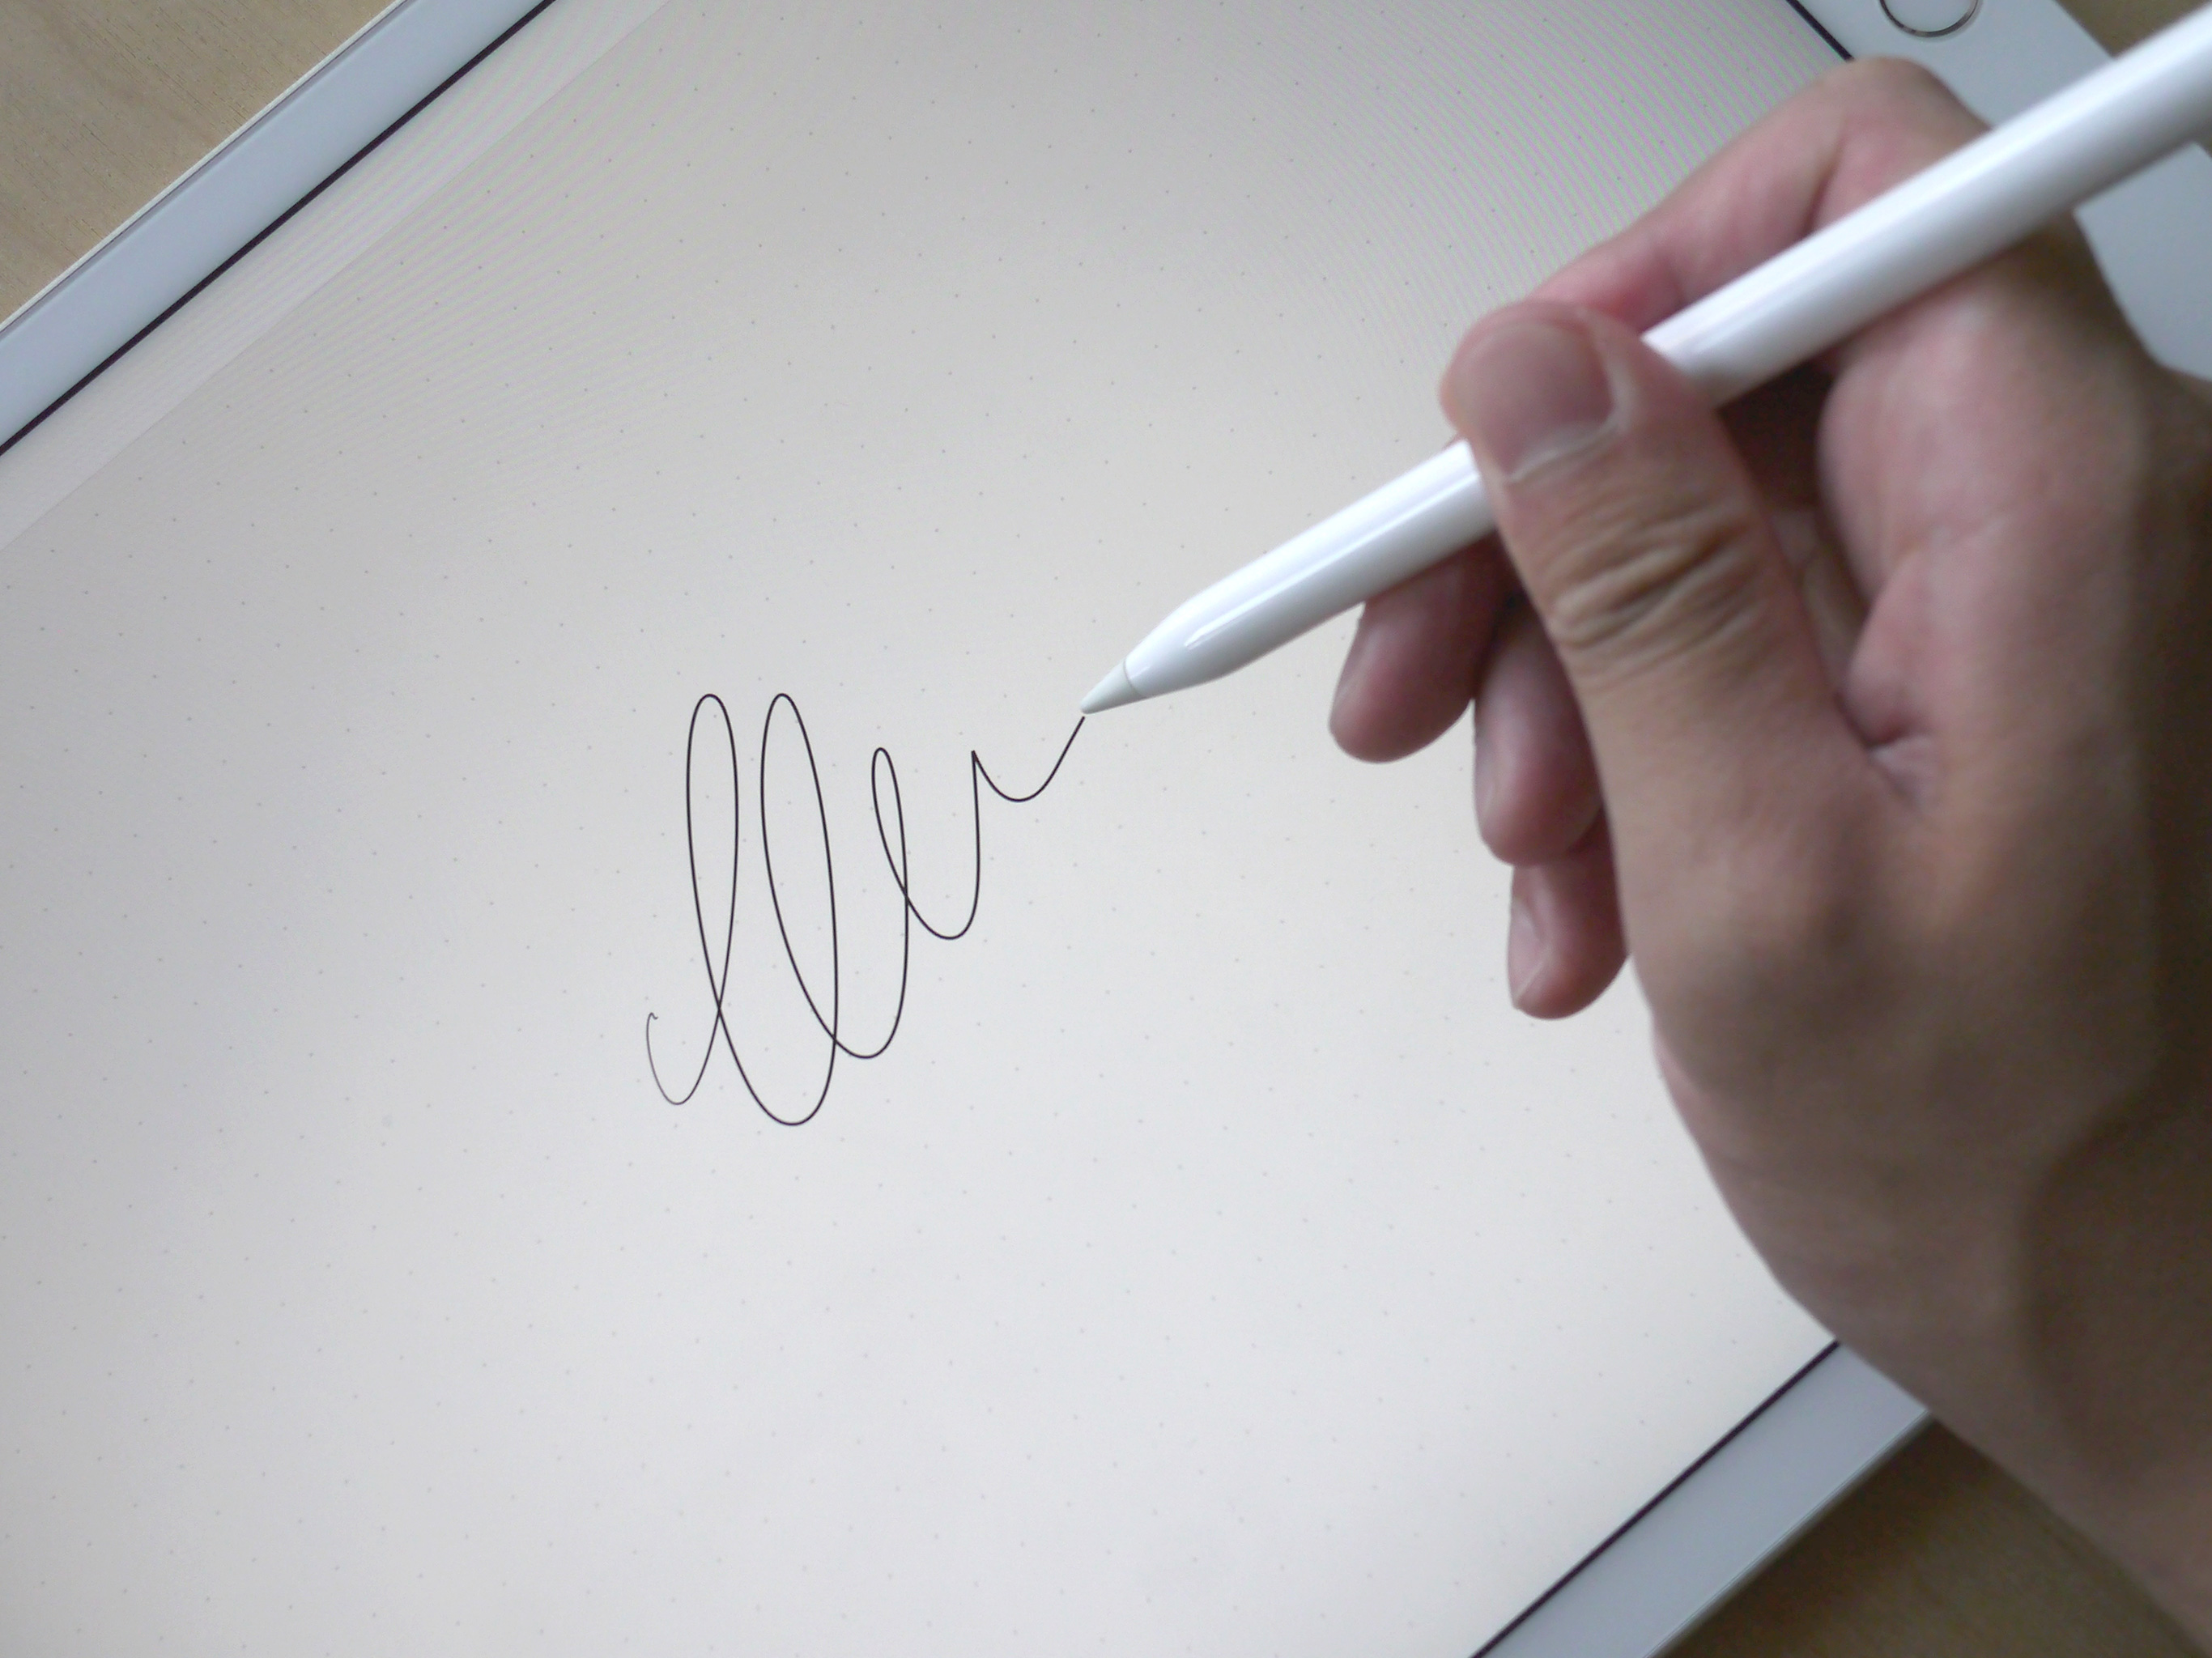 Pattern makes the most of the Apple Pencil